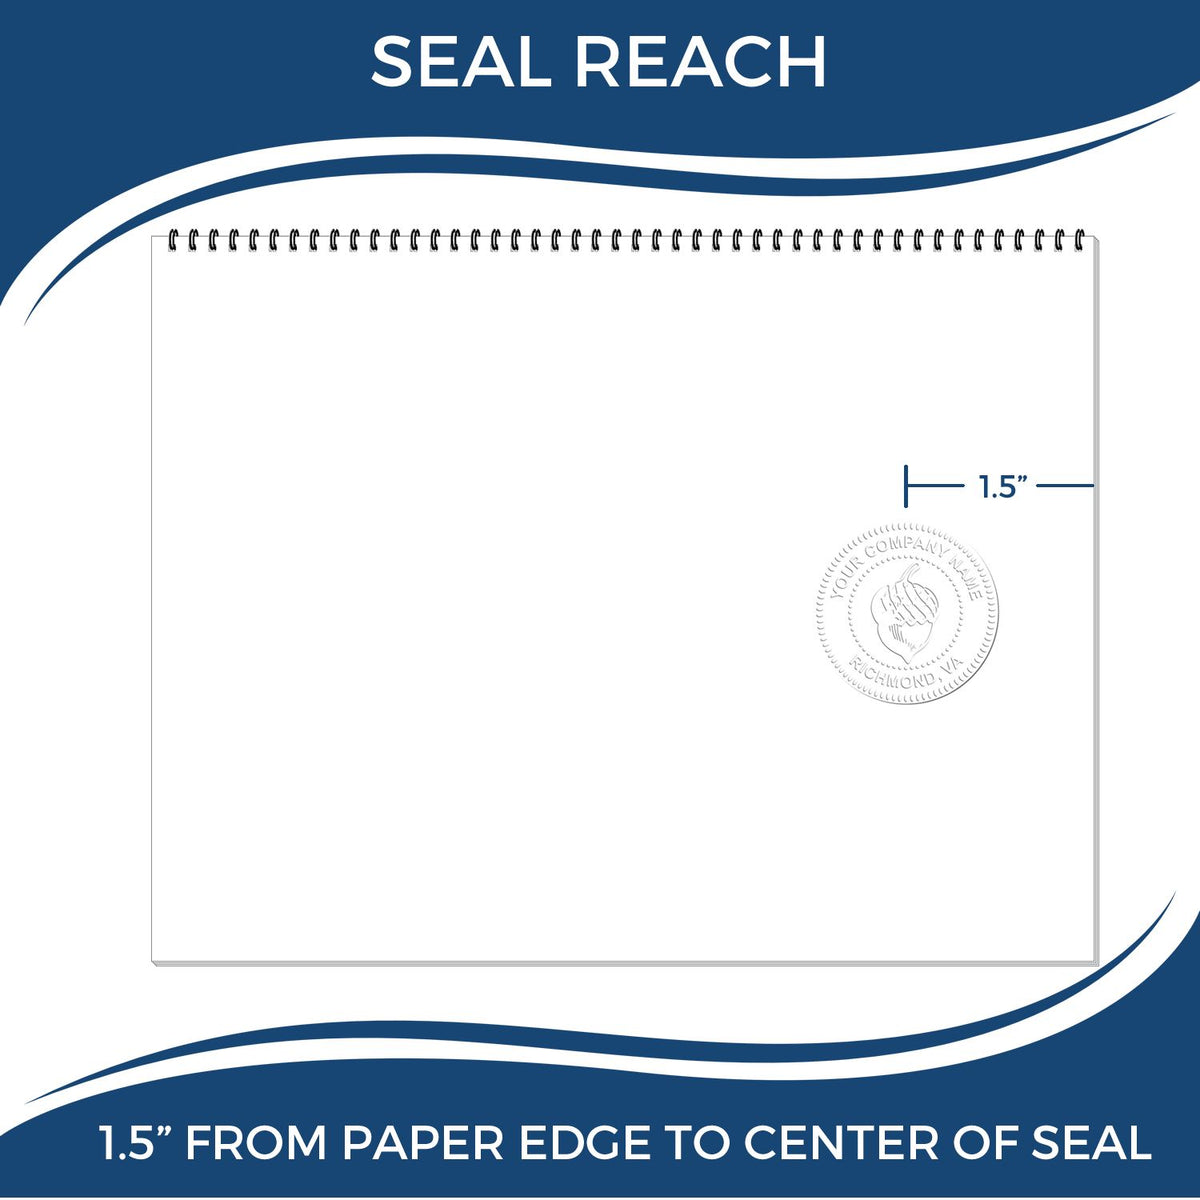 An infographic showing the seal reach which is represented by a ruler and a miniature seal image of the Handheld Minnesota Architect Seal Embosser